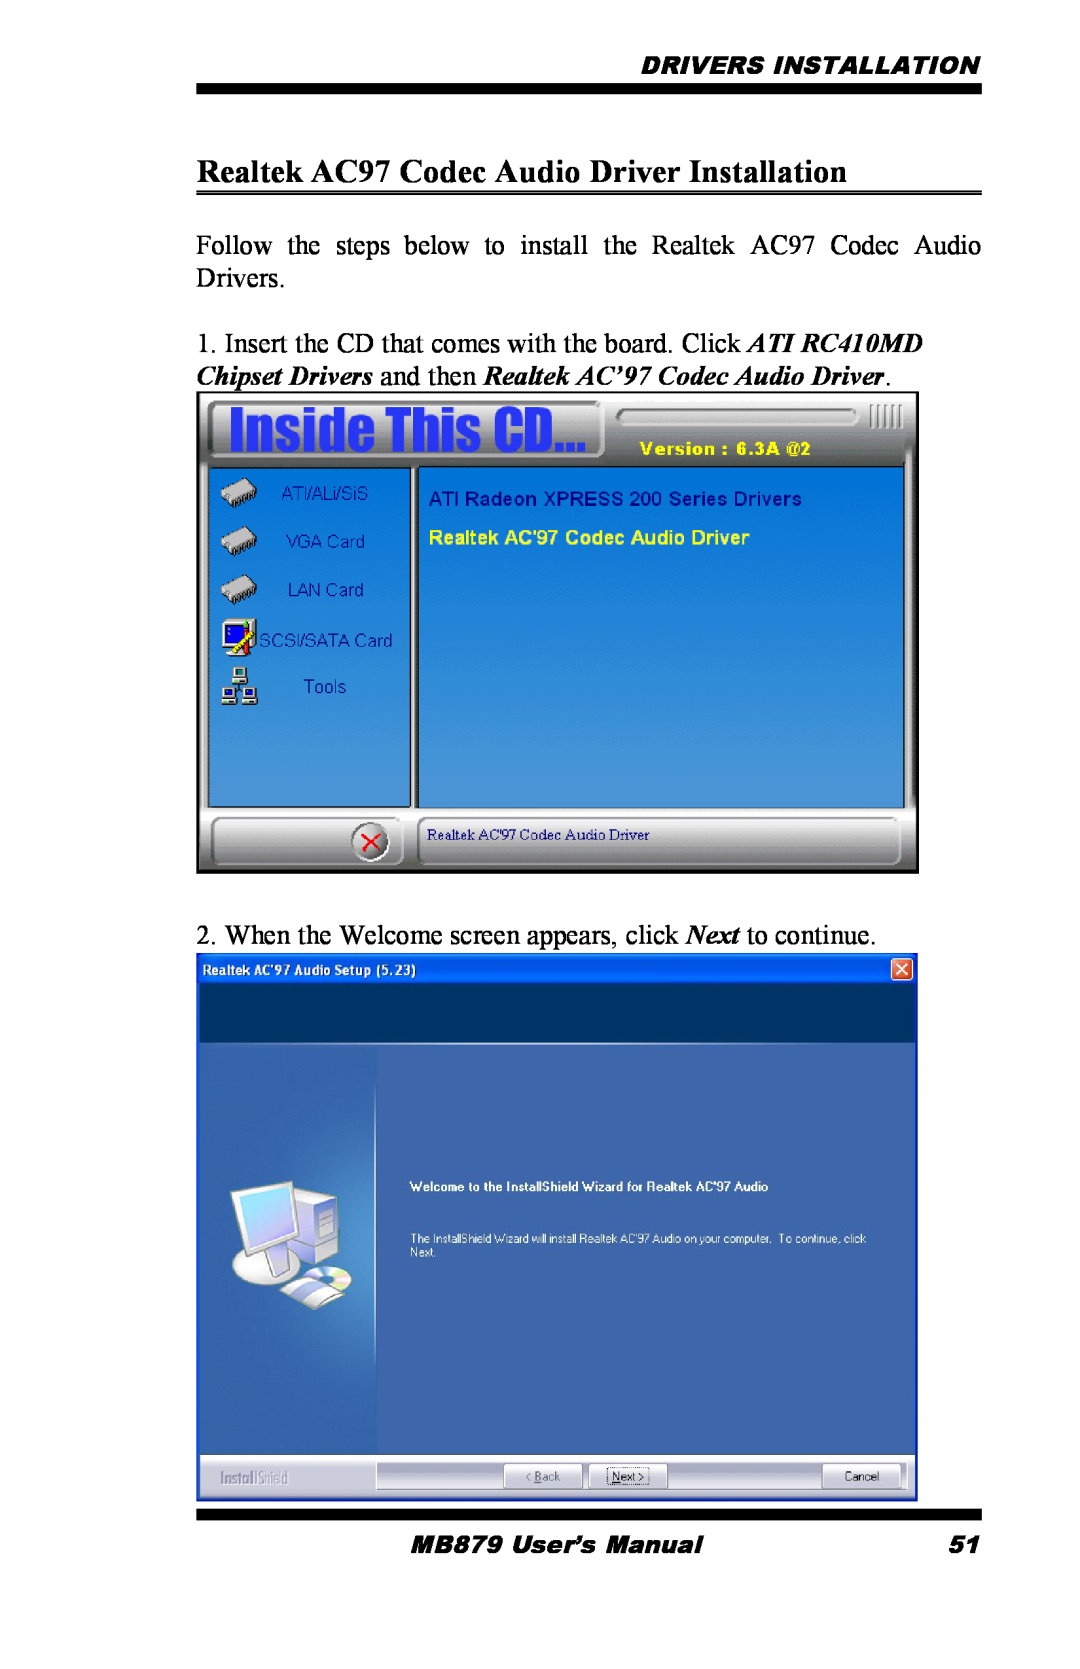 Intel MB879 Realtek AC97 Codec Audio Driver Installation, When the Welcome screen appears, click Next to continue 